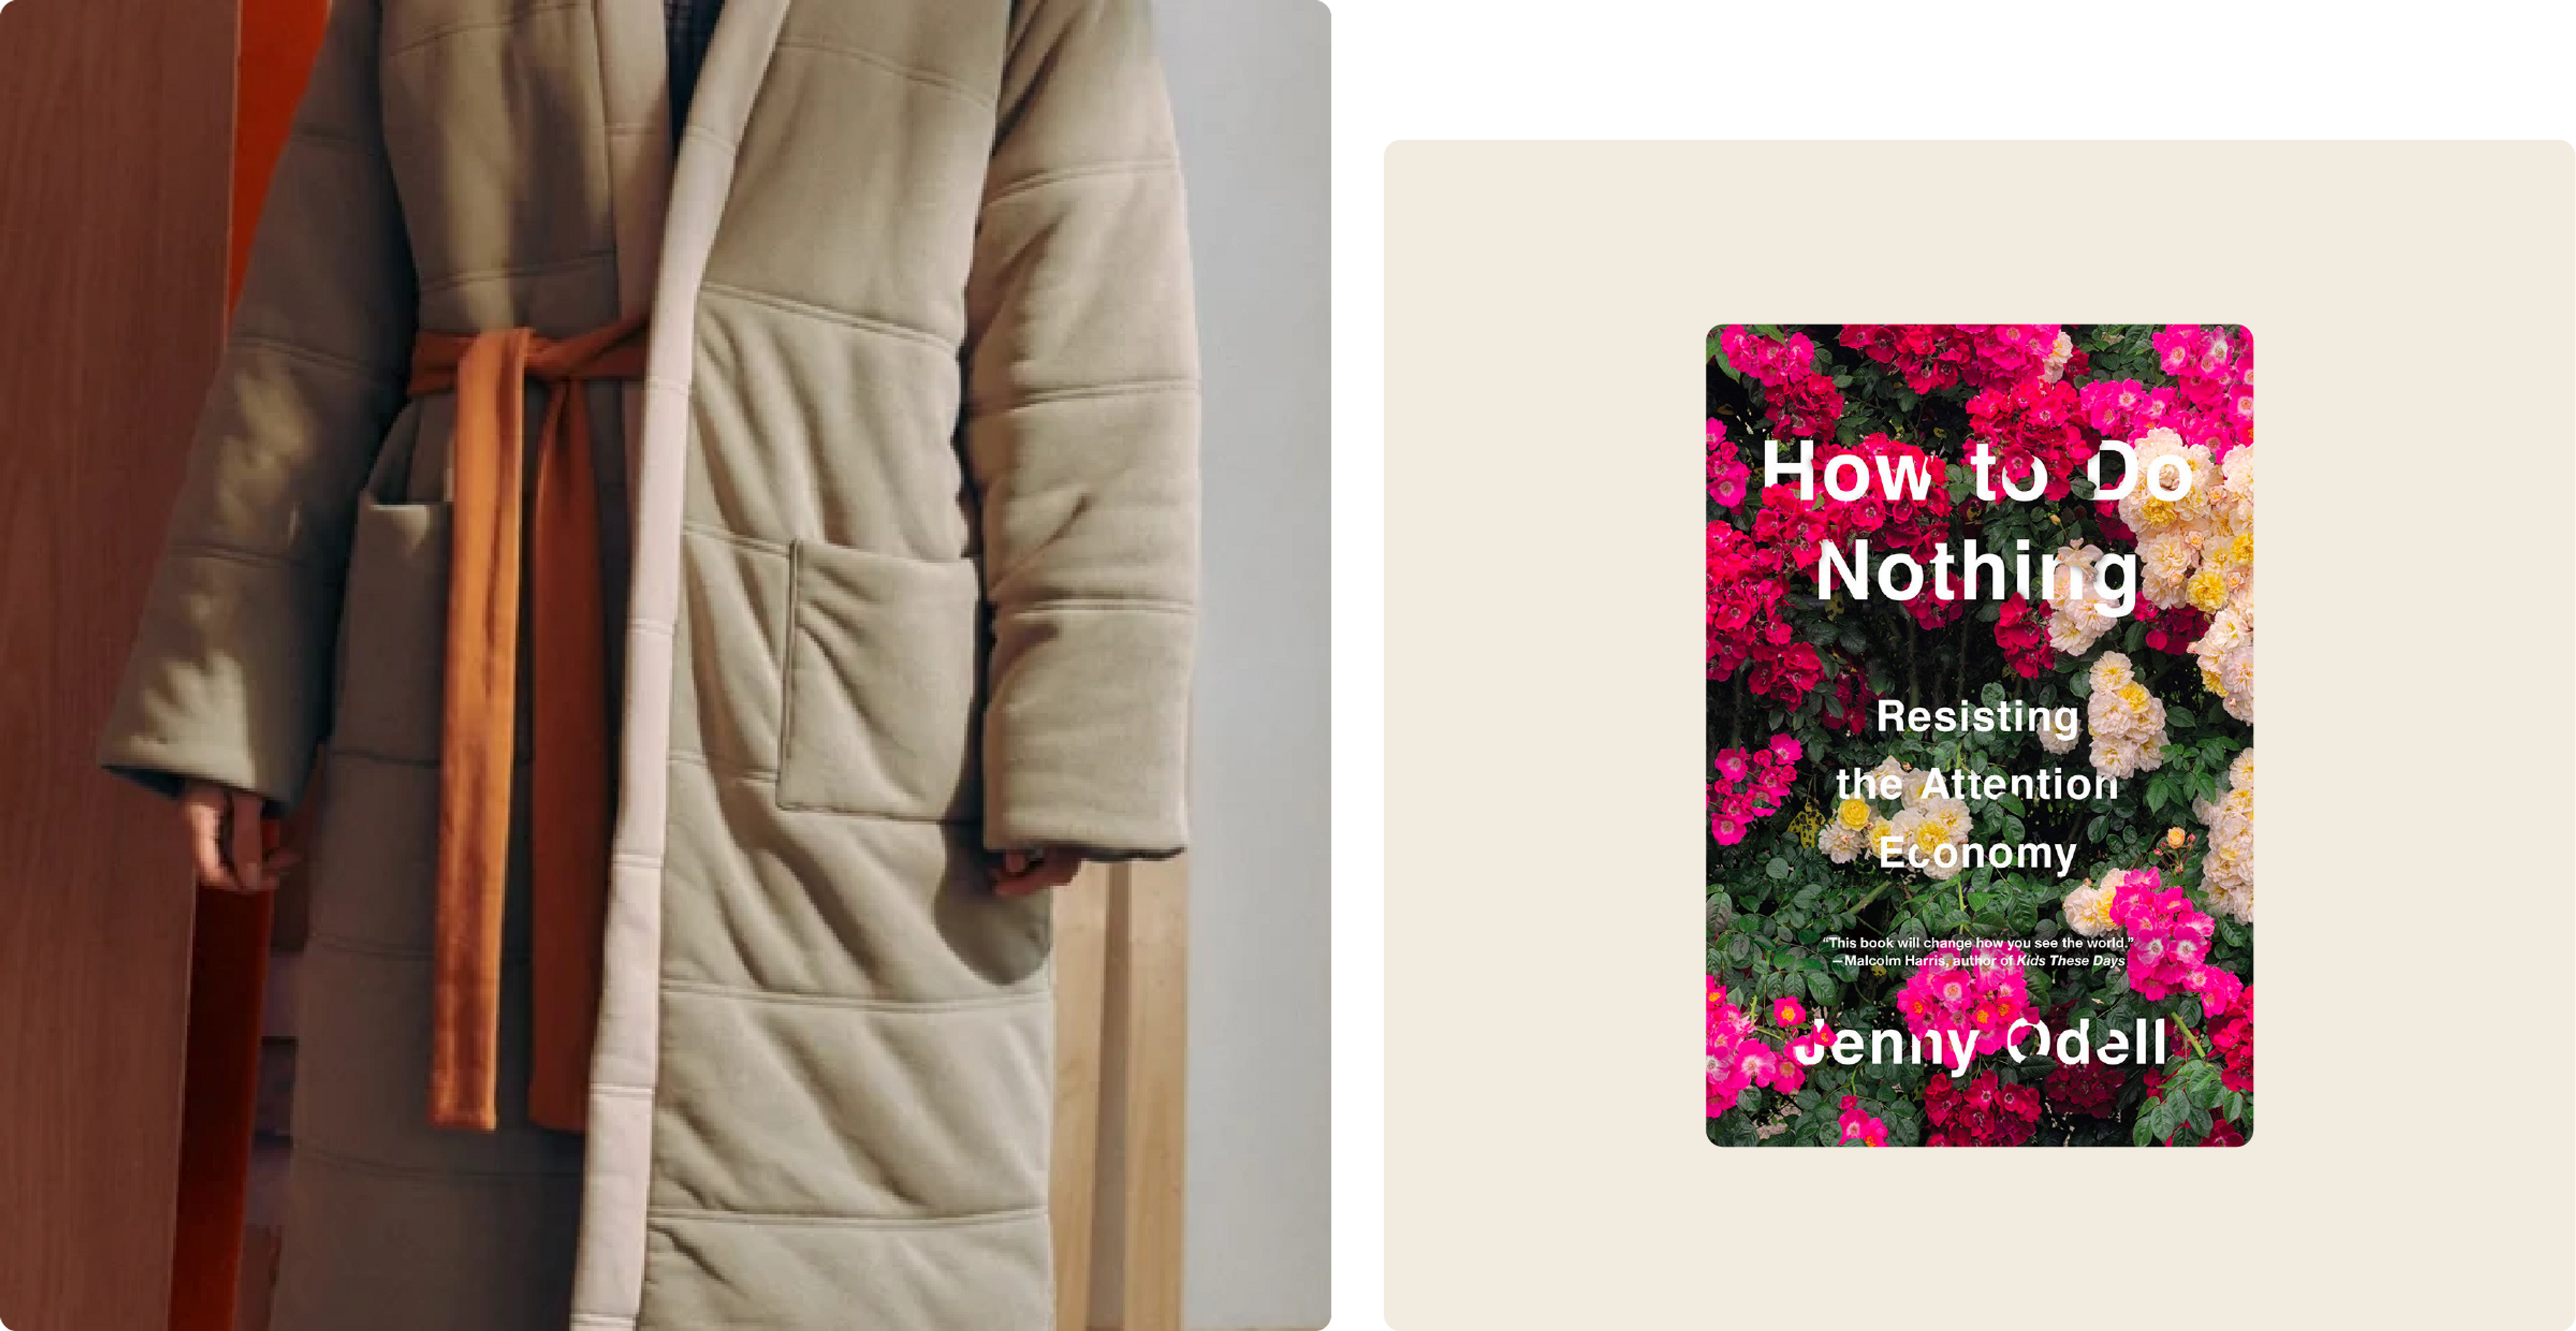 'How to do Nothing' by Jenny Odell, OFFHOURS Homecoat